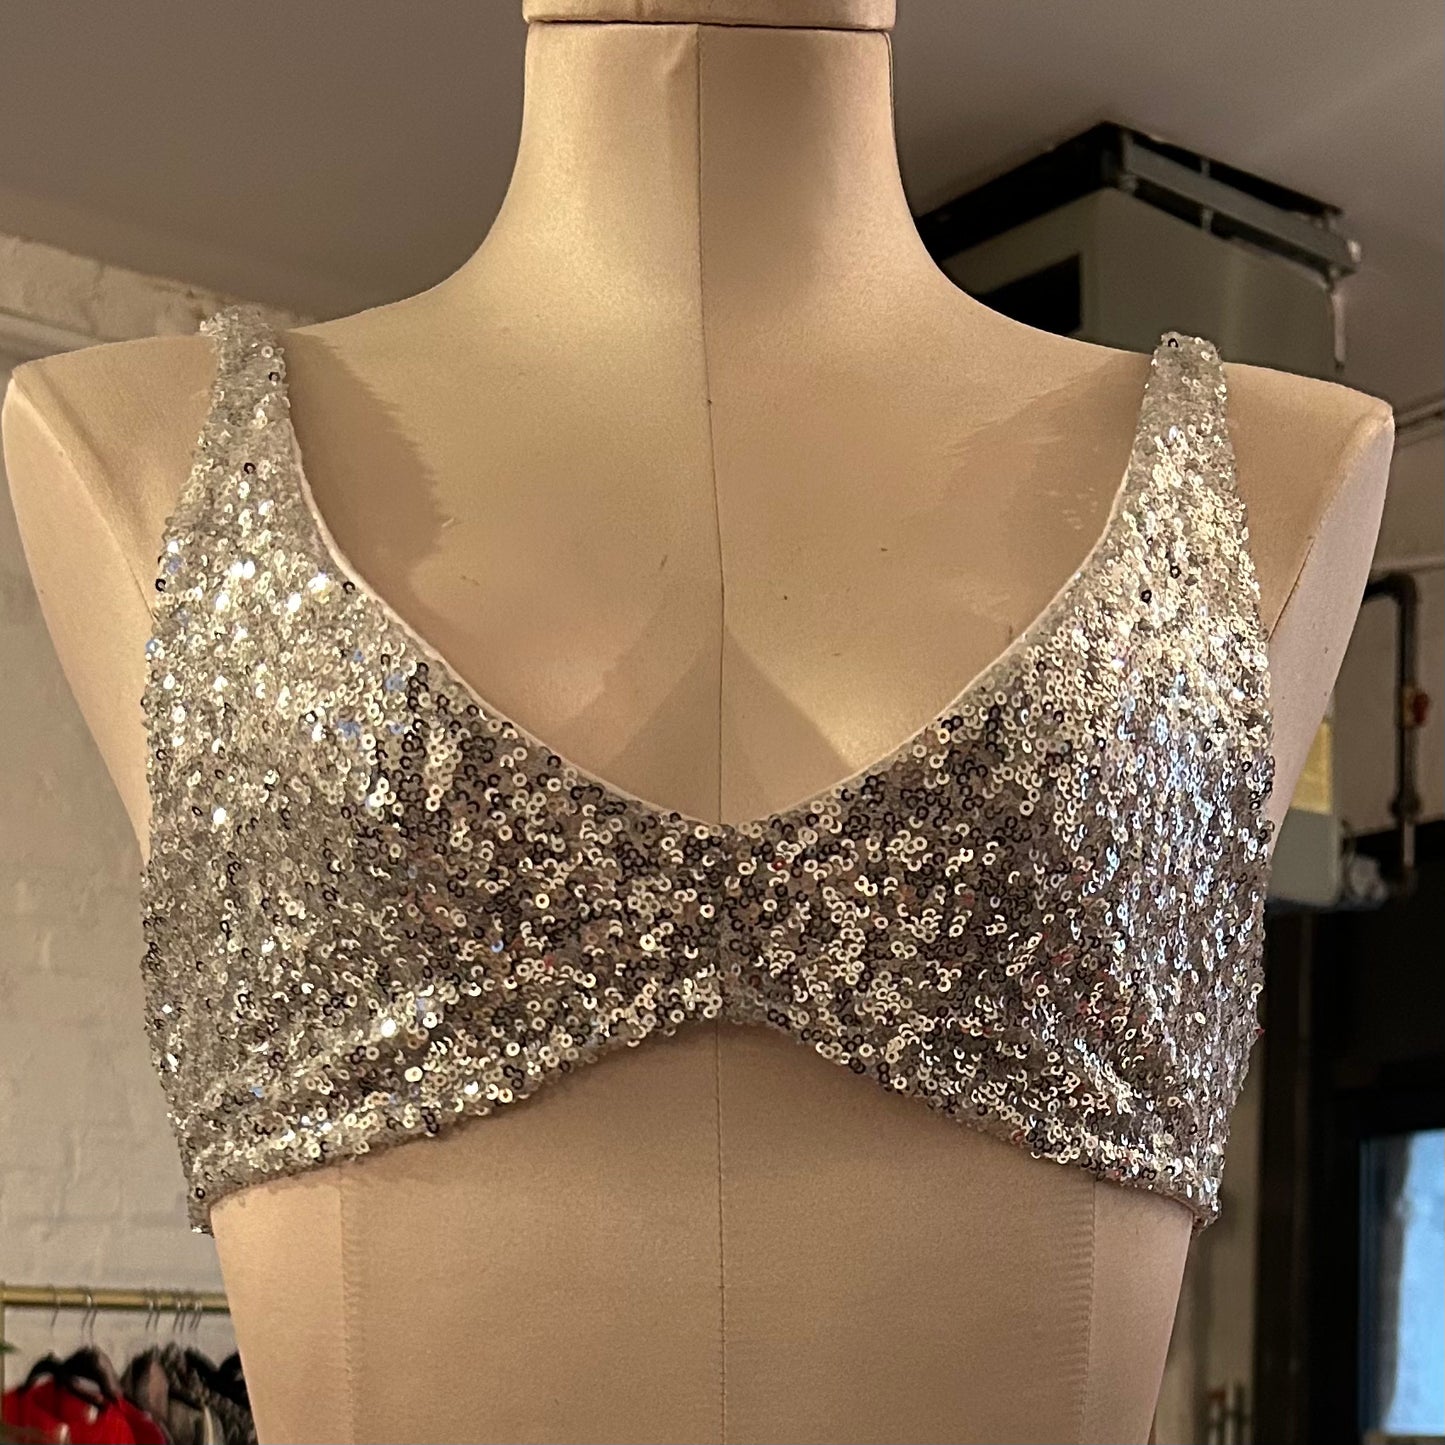 Only Hearts Shine On Sequin Bra in Red